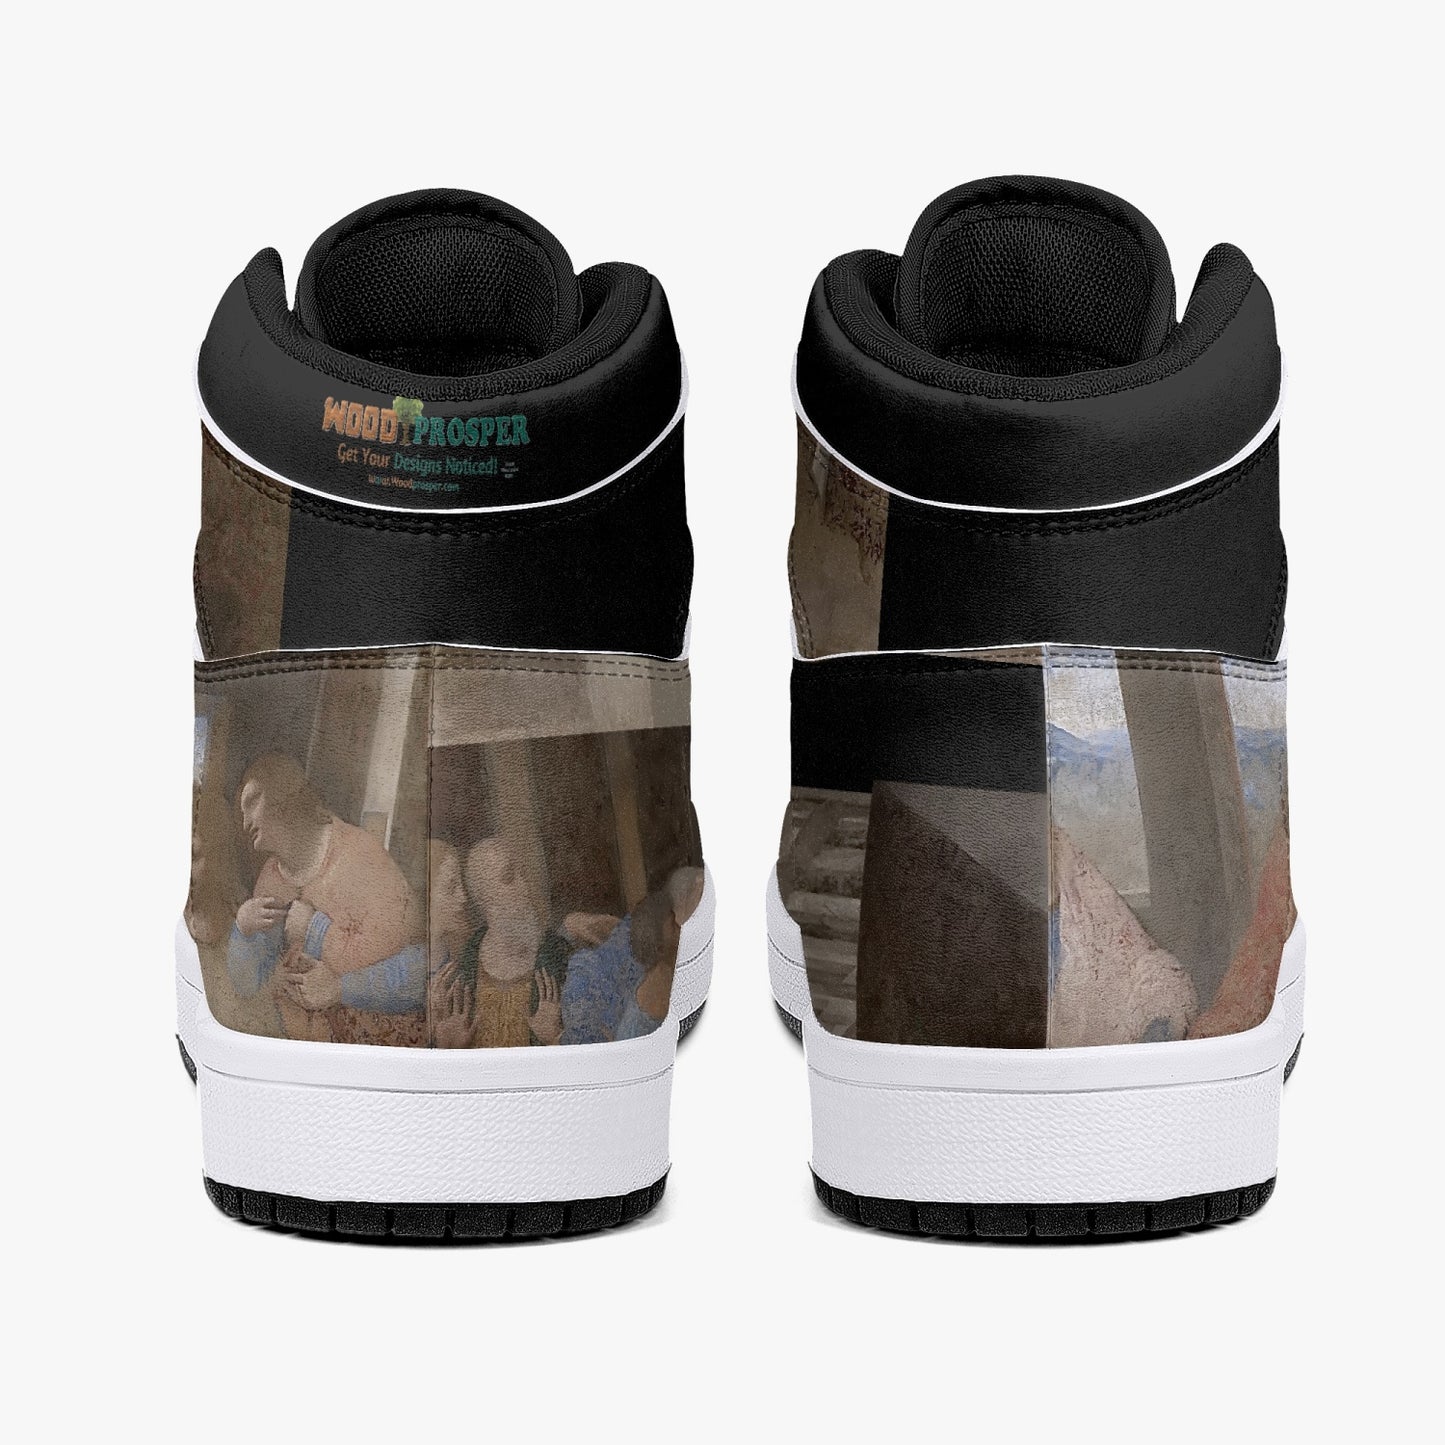 209. Custom Designed The Last Supper High-Top Leather Sneakers - White / Black